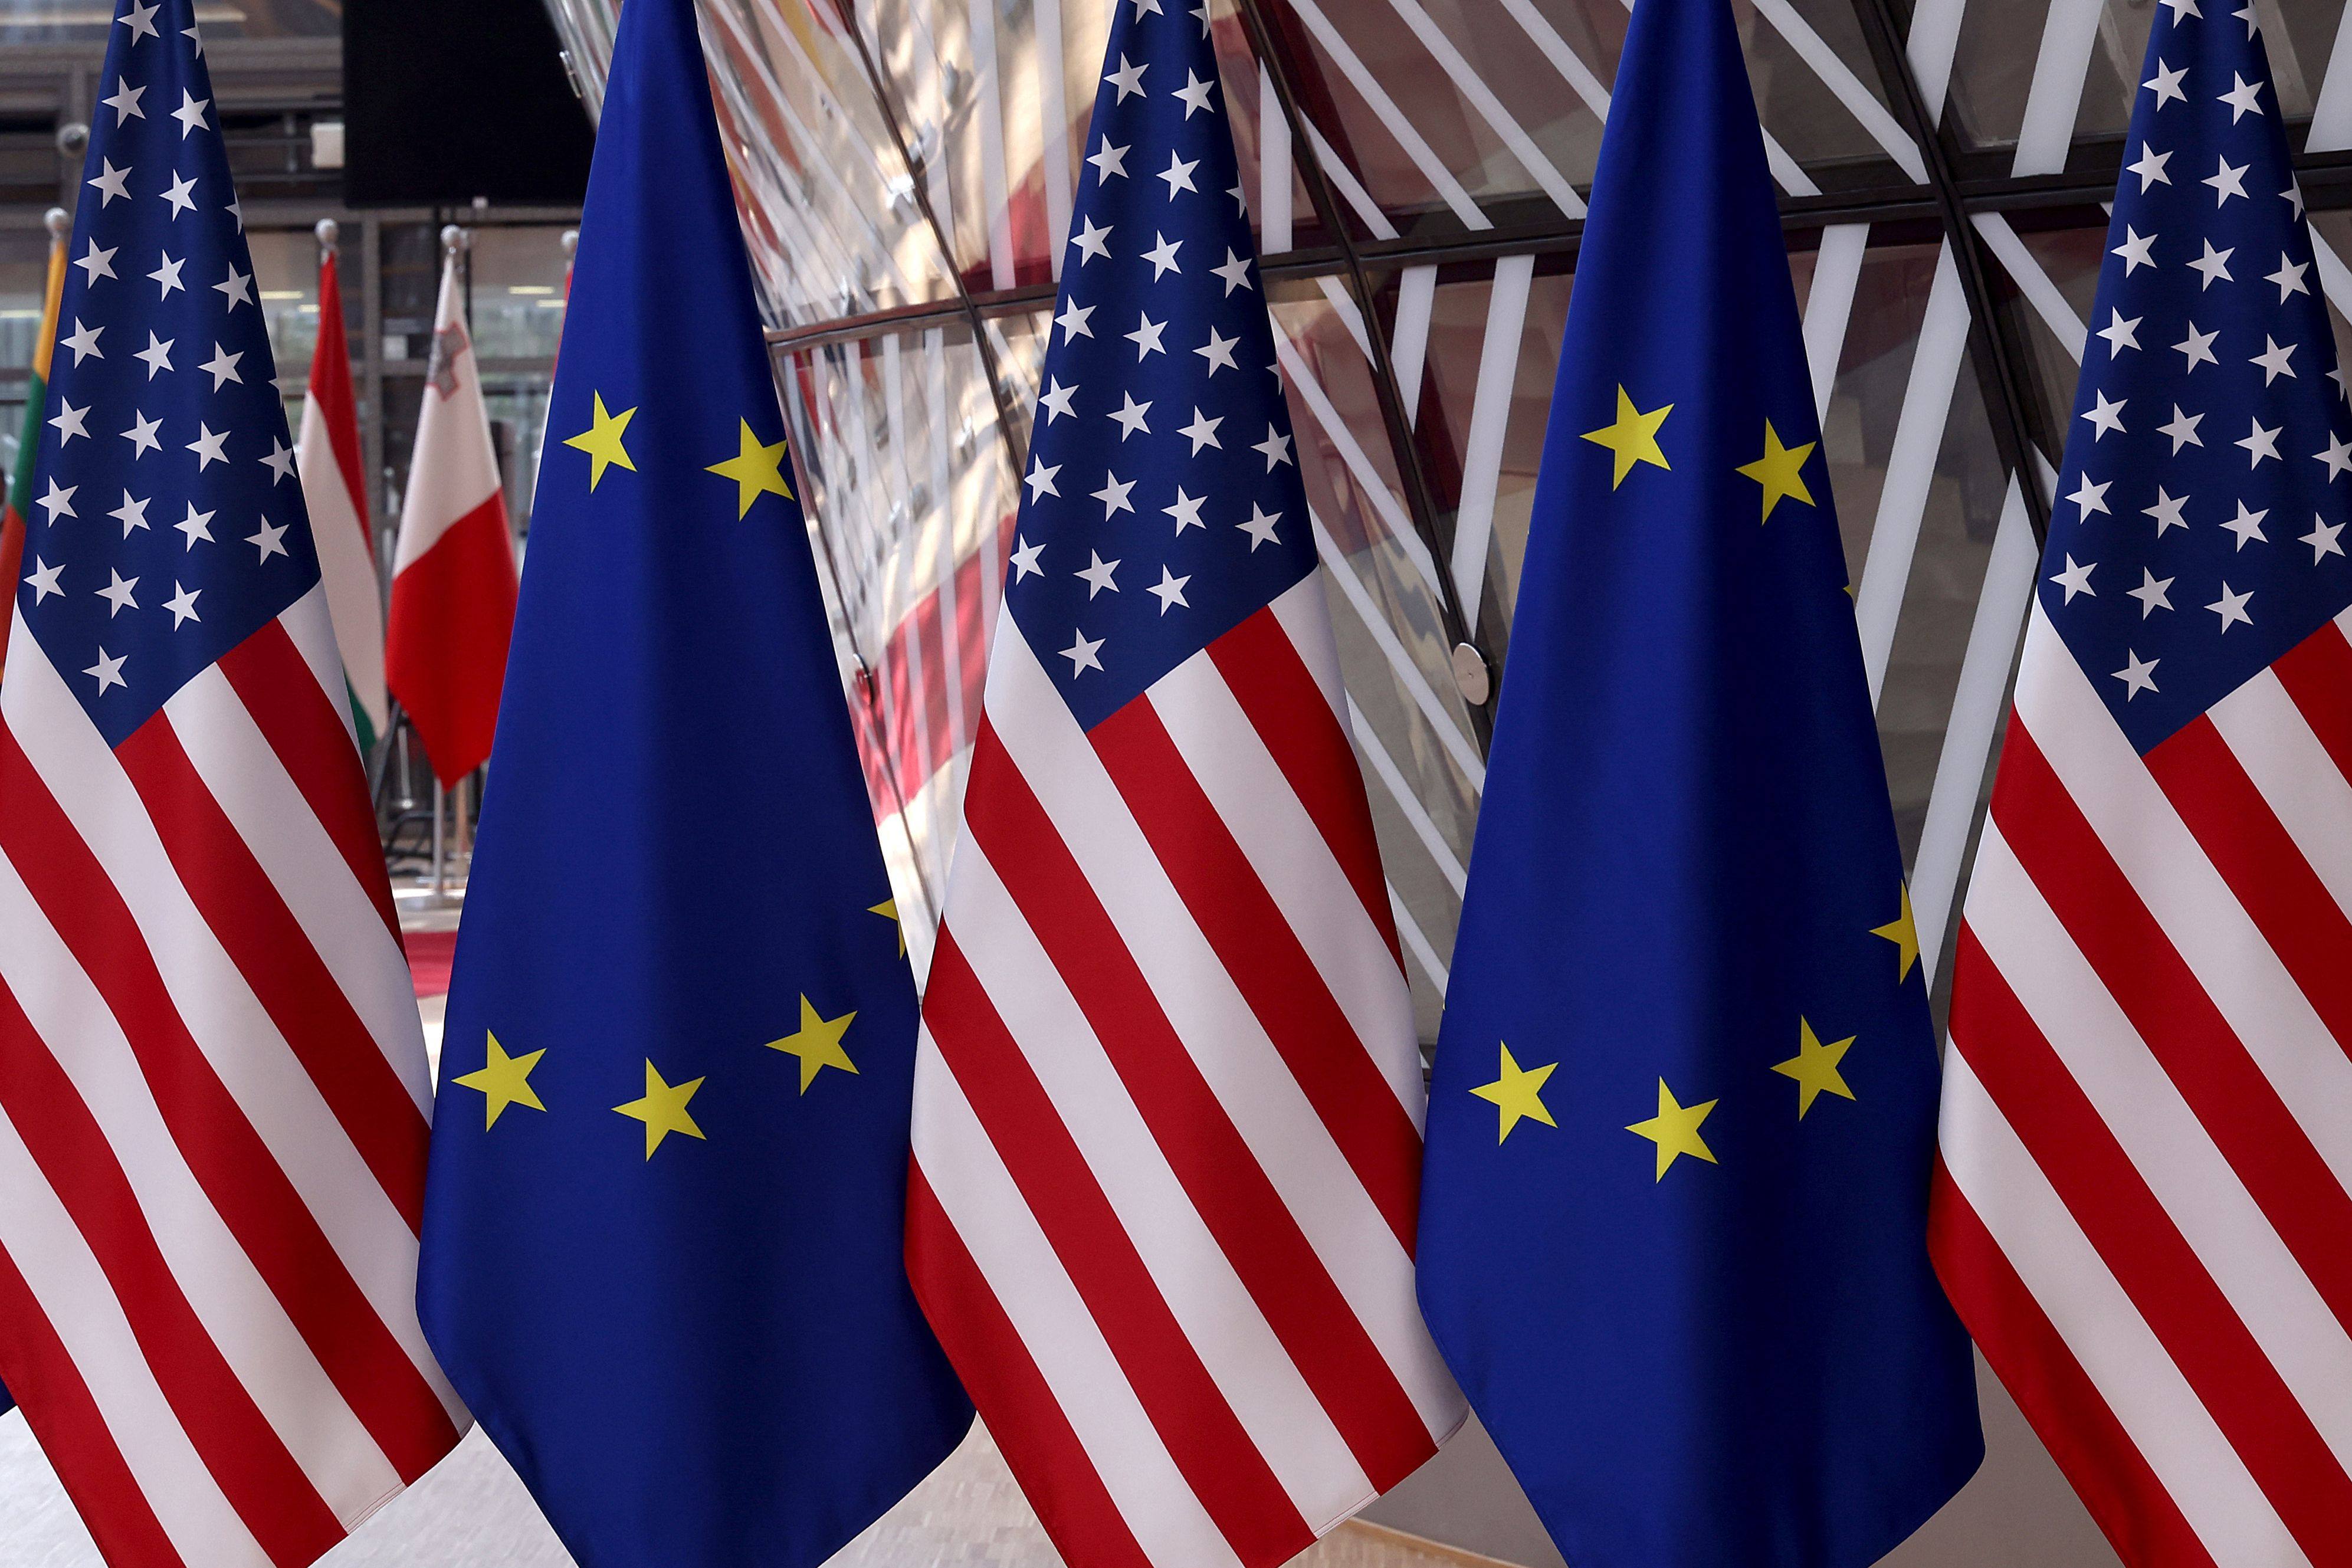 Flags of the European Union and the United States at an EU-US summit in Brussels, Belgium on June 15, 2021. File photo: AFP